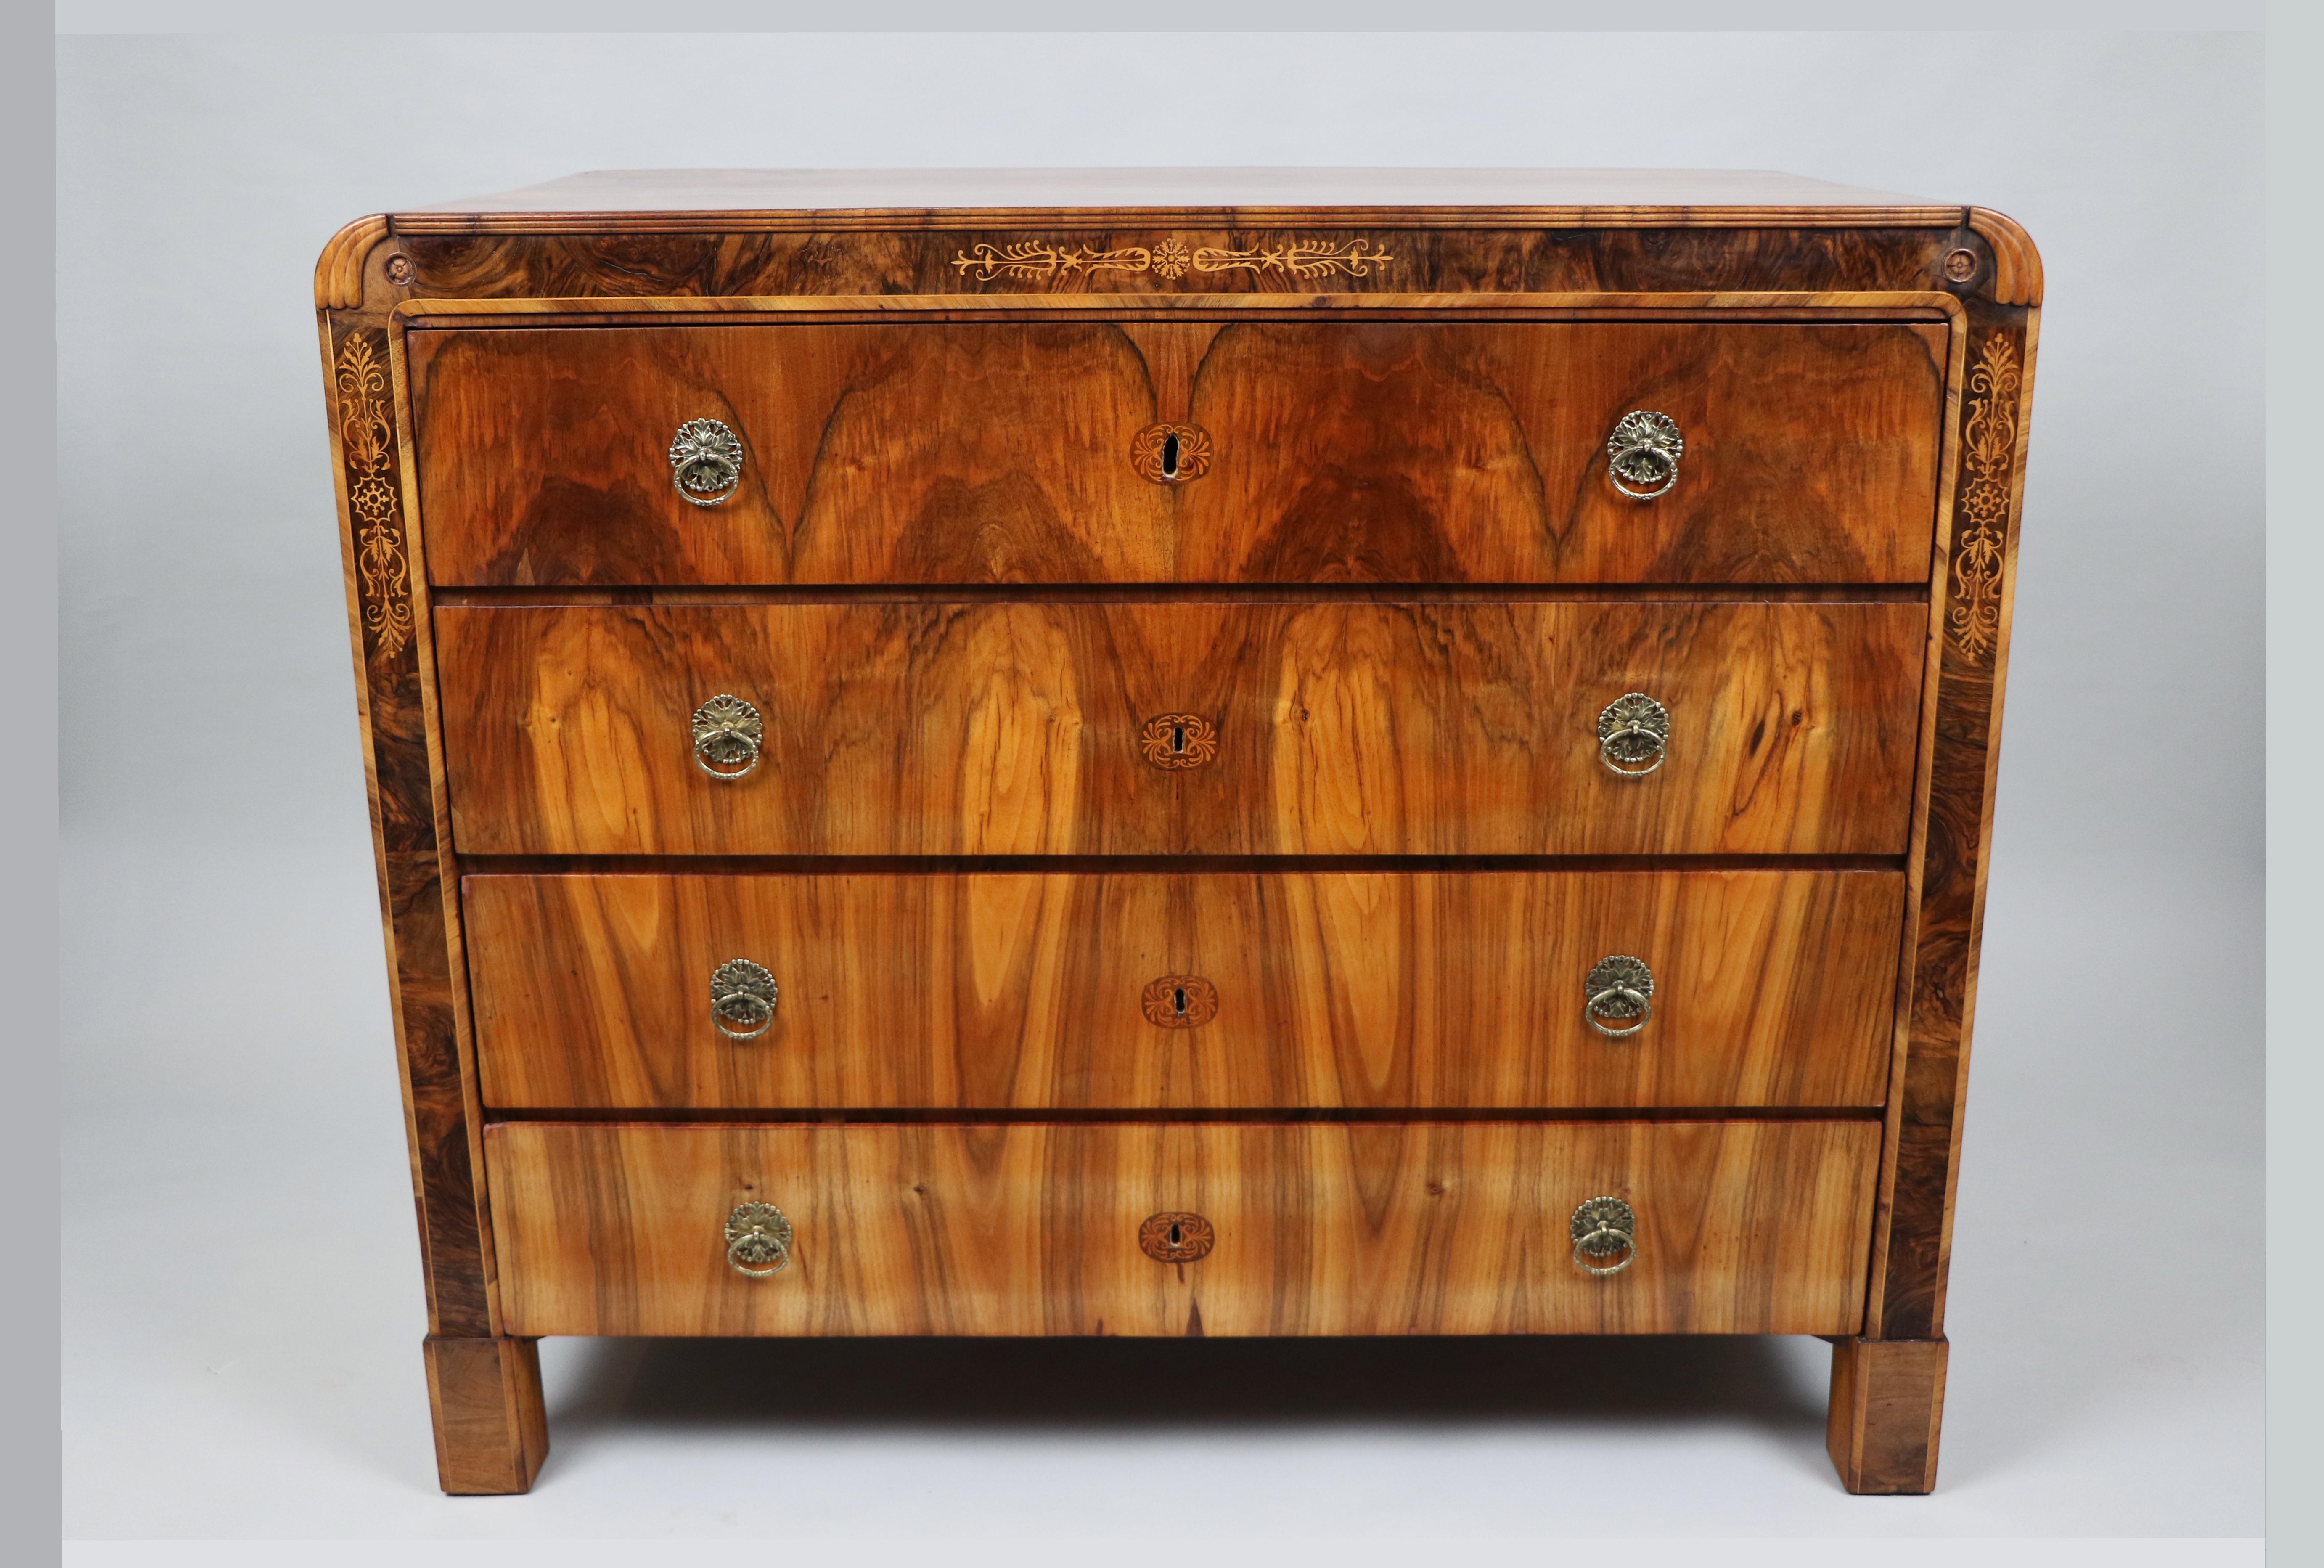 We would like to offer you this truly exquisite, early Biedermeier walnut commode. The piece was made in Vienna circa 1820-25.

Viennese Biedermeier is distinguished by their sophisticated proportions, rare and refined design and excellent